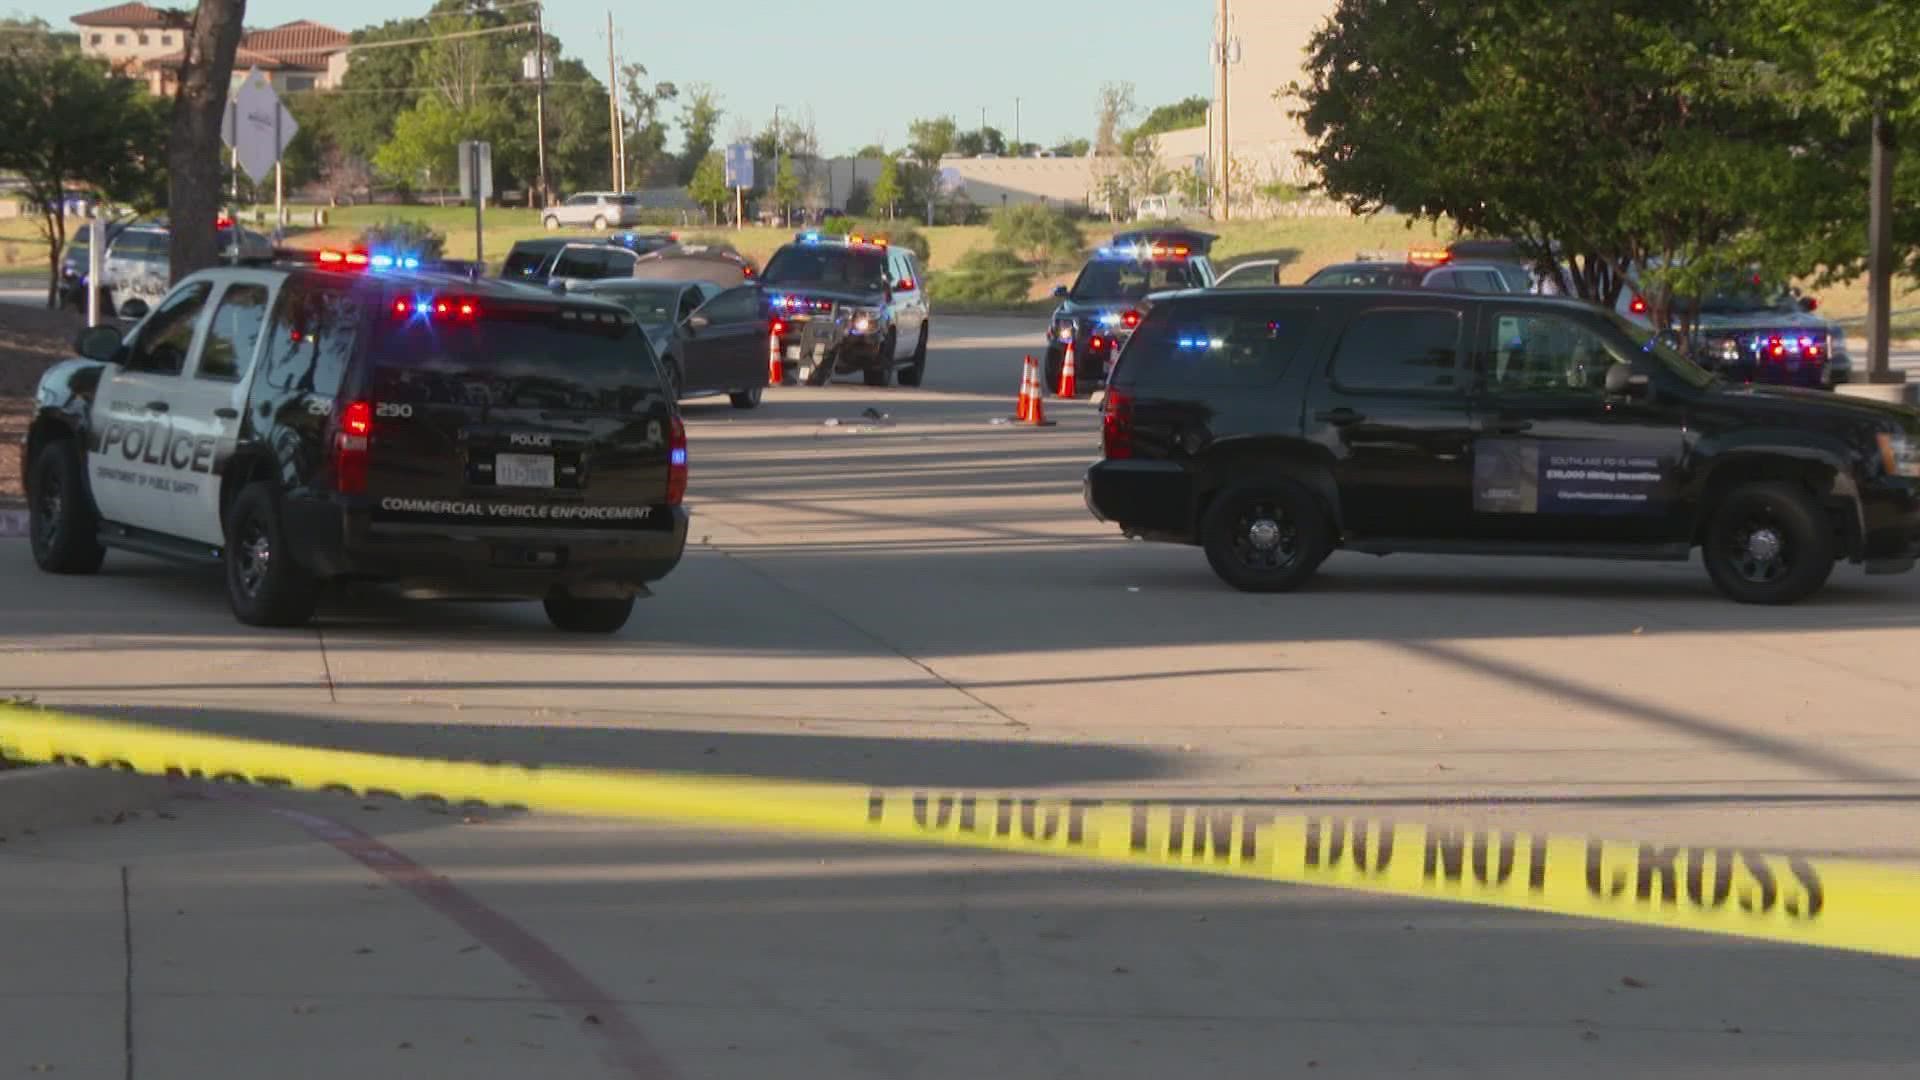 Southlake police say the suspect pointed a gun at officers during a traffic stop.